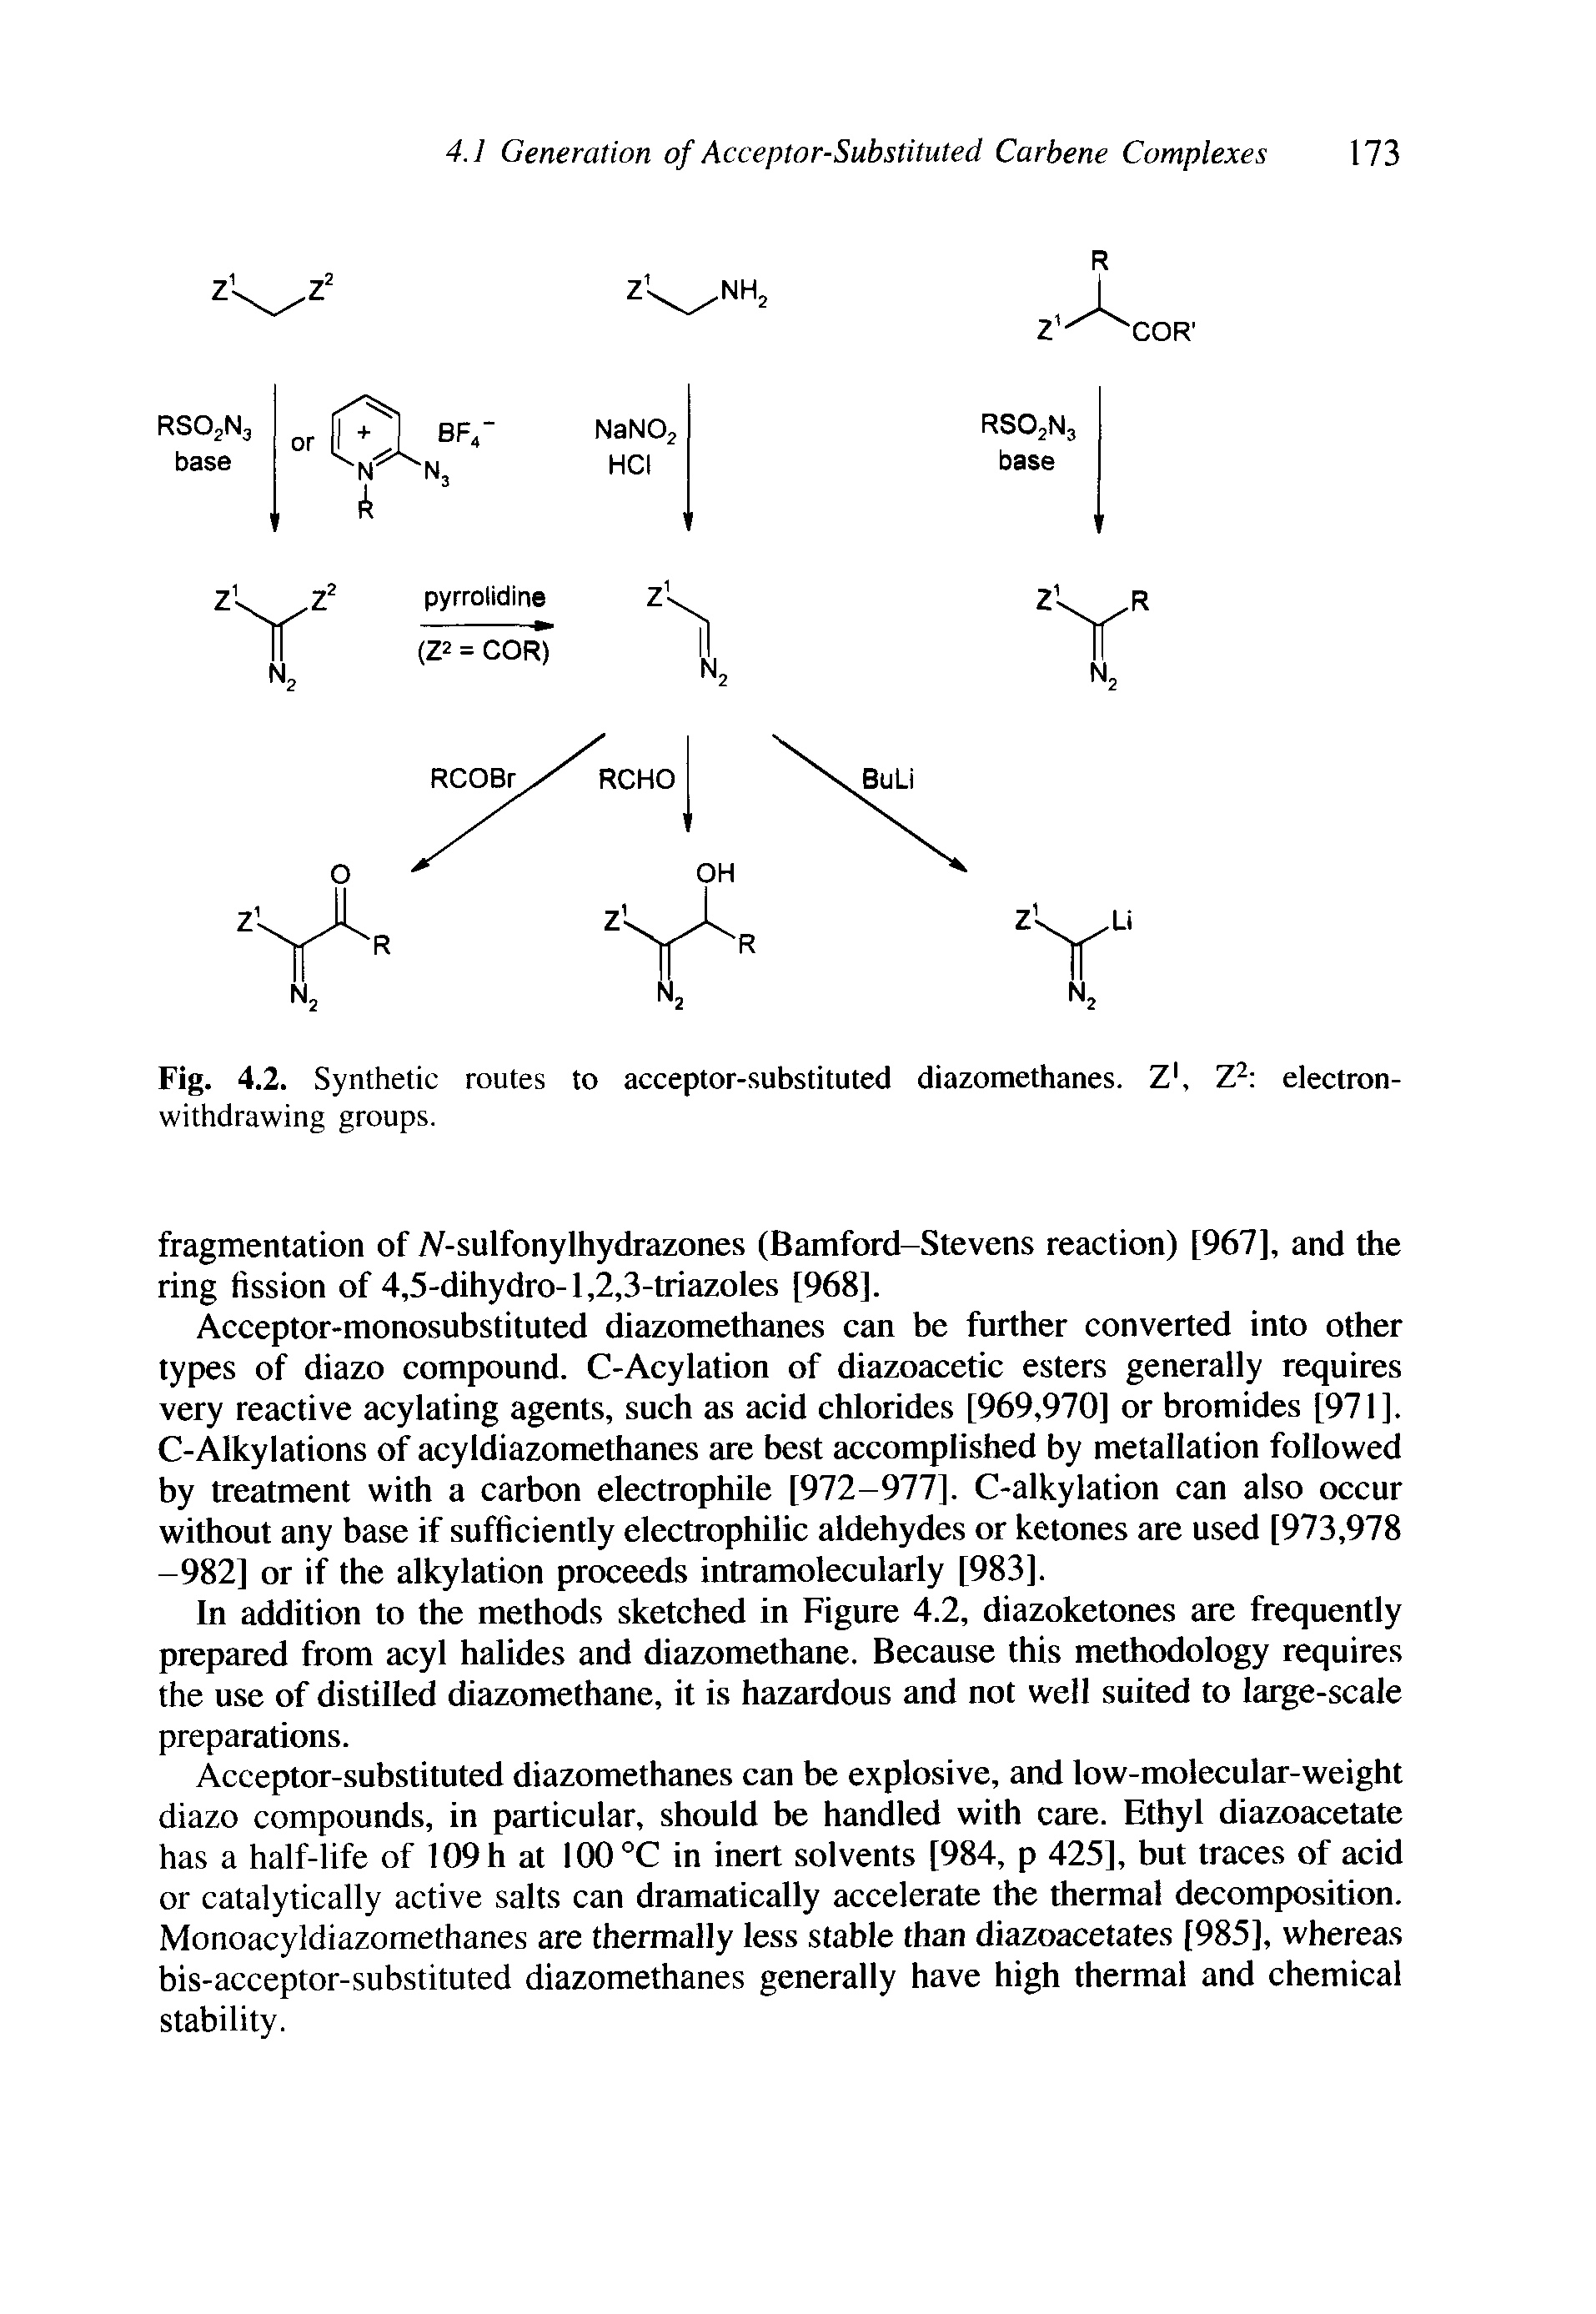 Fig. 4.2. Synthetic routes to acceptor-substituted diazomethanes. Z, Z electron-...